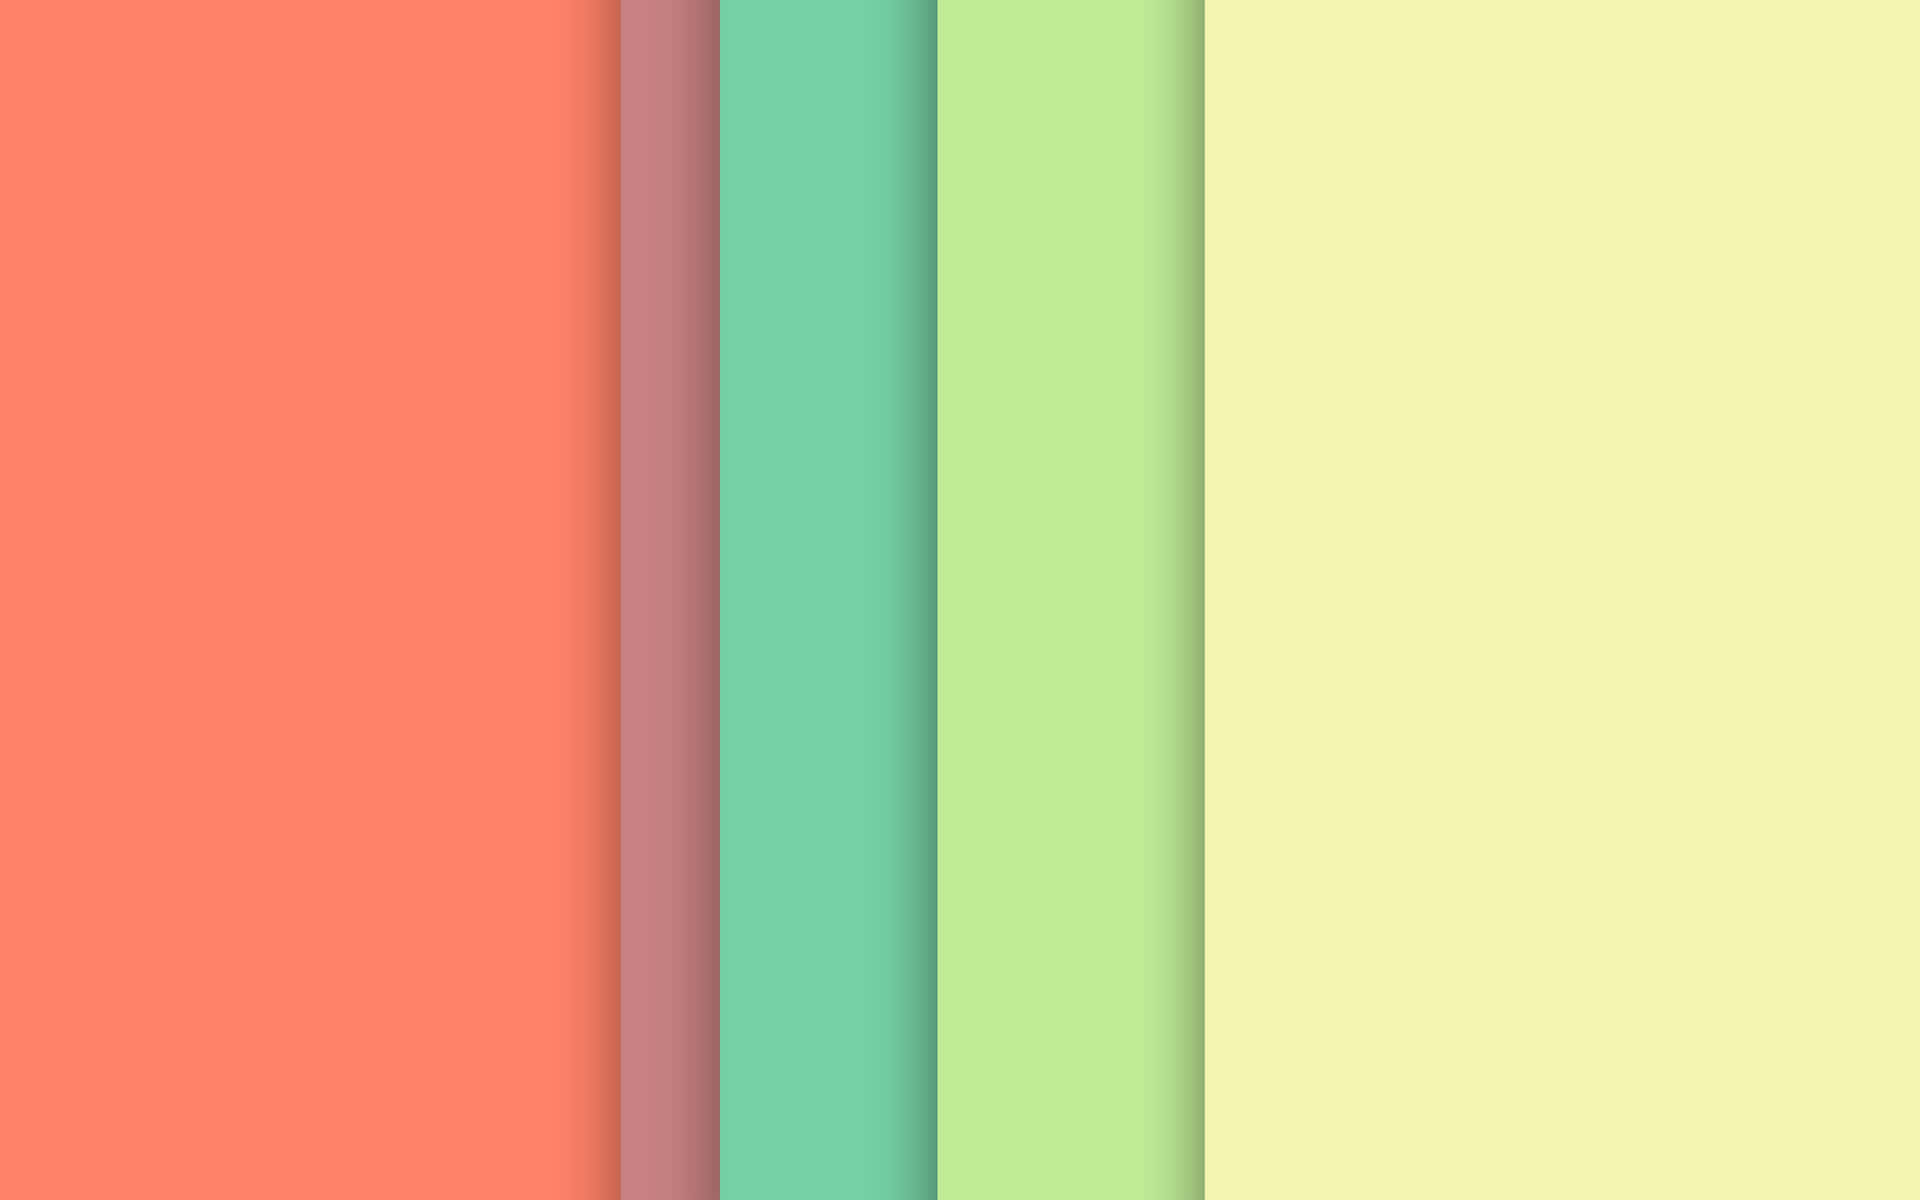 Brighten up your day with this cheerful pastel striped wallpaper Wallpaper